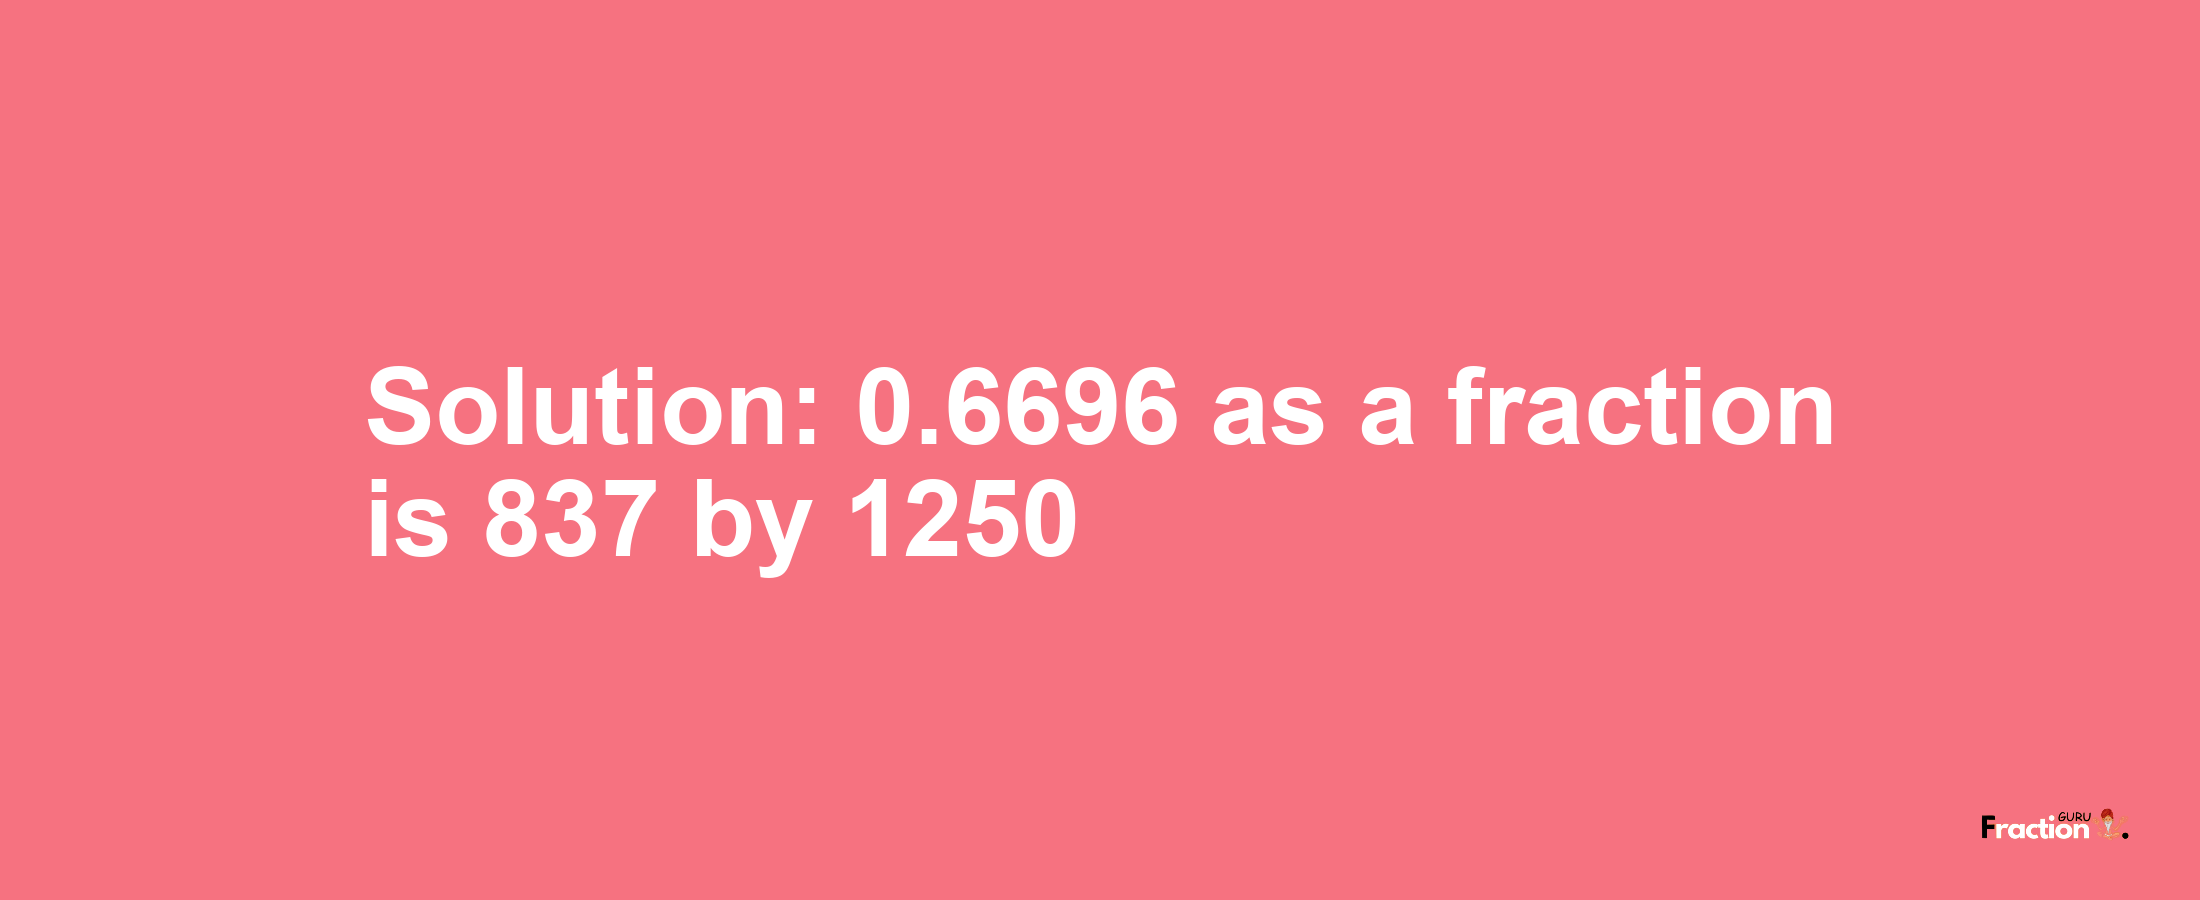 Solution:0.6696 as a fraction is 837/1250